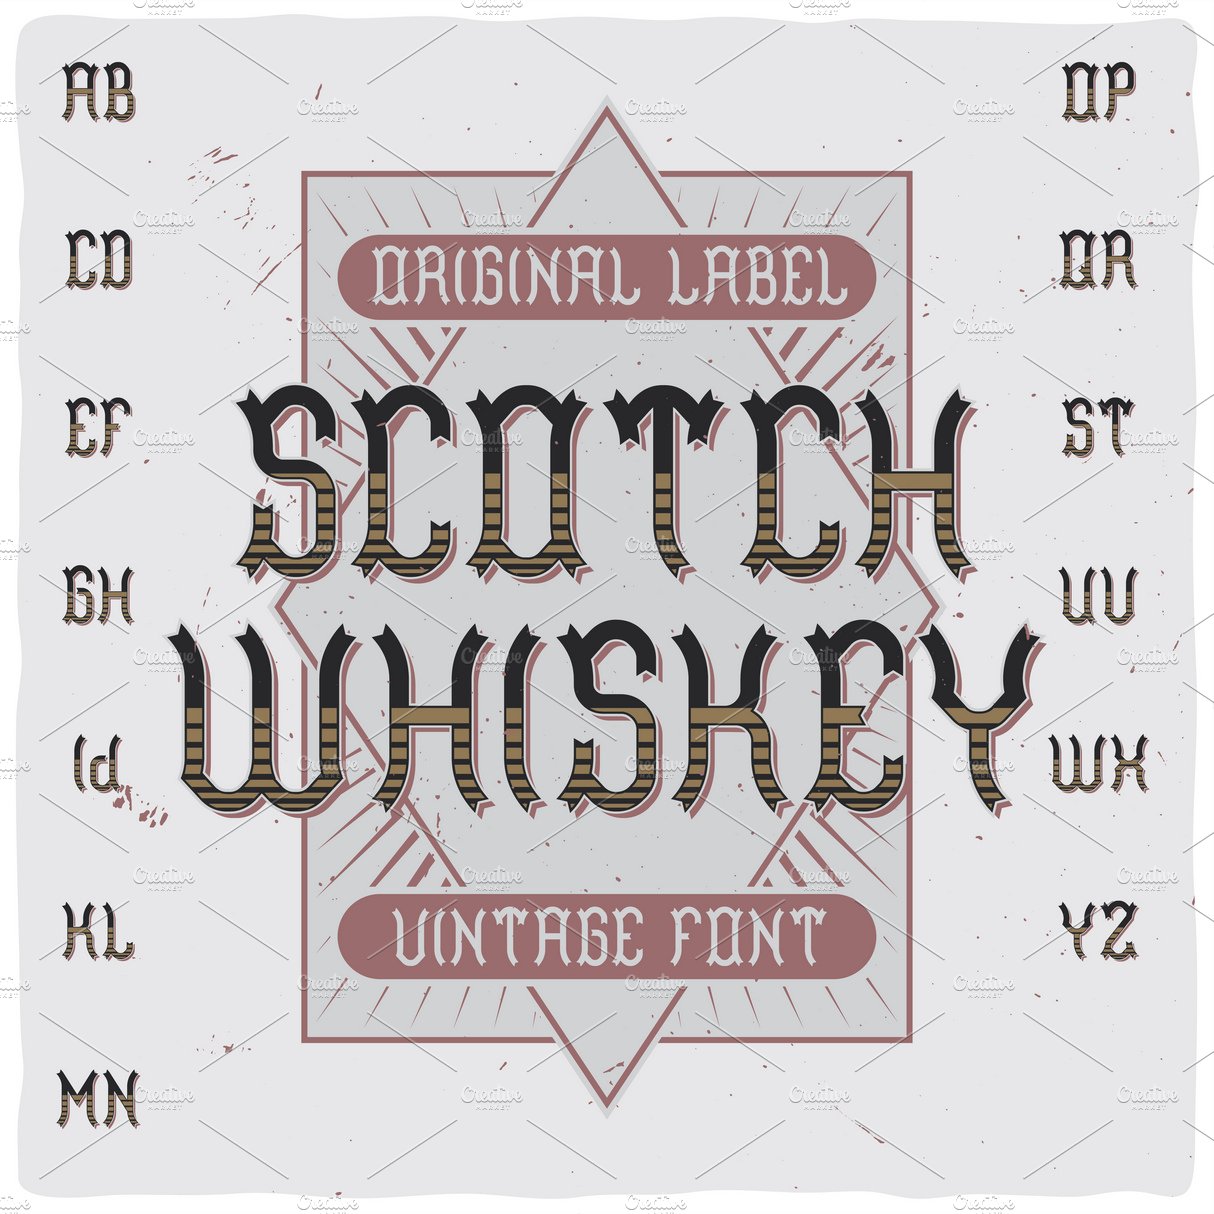 Vintage typeface Scotch Whiskey preview image.